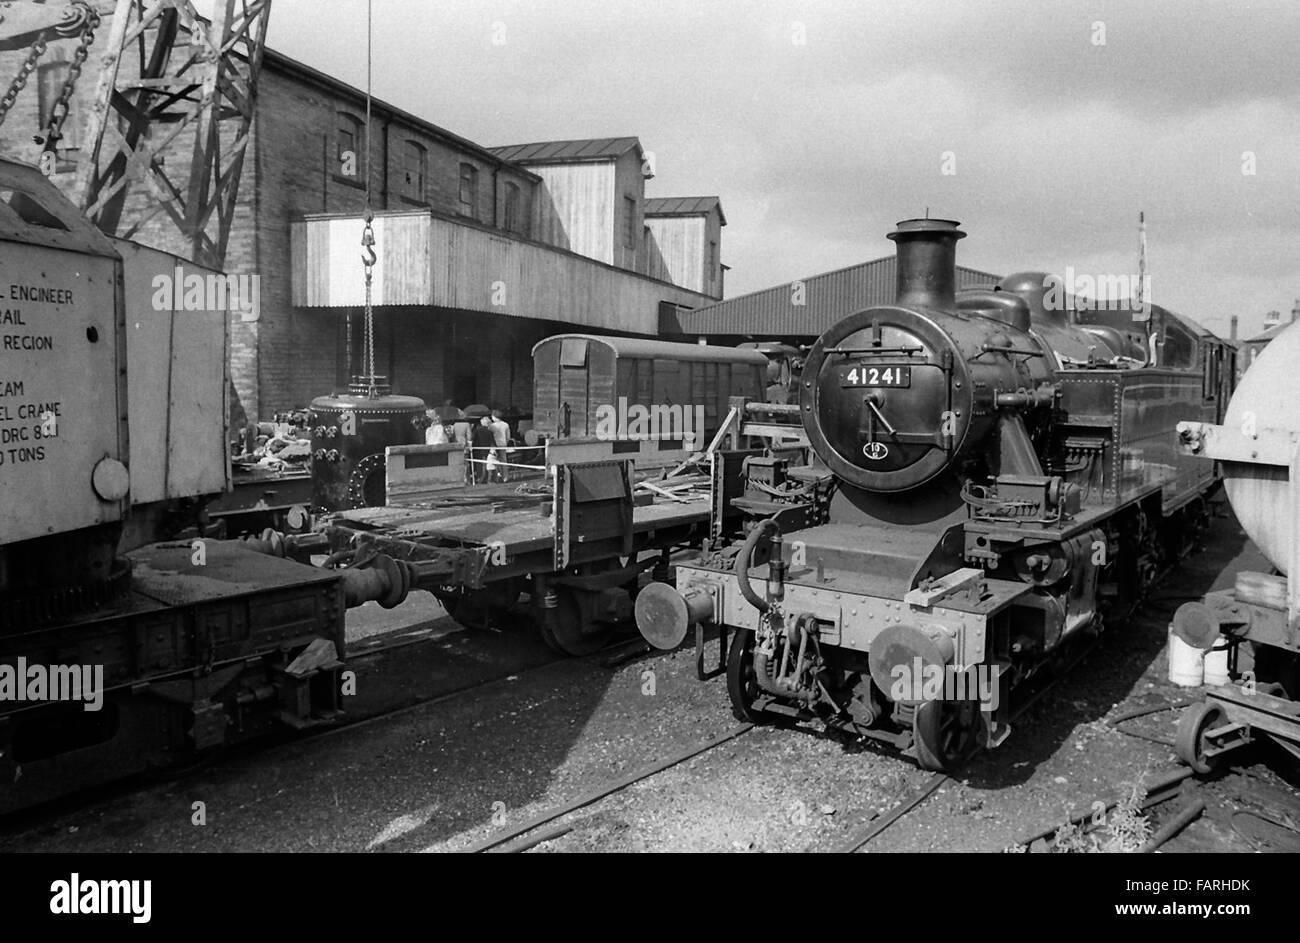 Haworth railway station, West Yorkshire circa 1982 black and white archive image. Home of the Keighley and Worth Valley Railway, the KWVR is manned by volunteers. LONDON MIDLAND & SCOTTISH IVATT CLASS 2MT 2-6-2T NO. 41241, built in 1948. Recovery crane also visible. Stock Photo